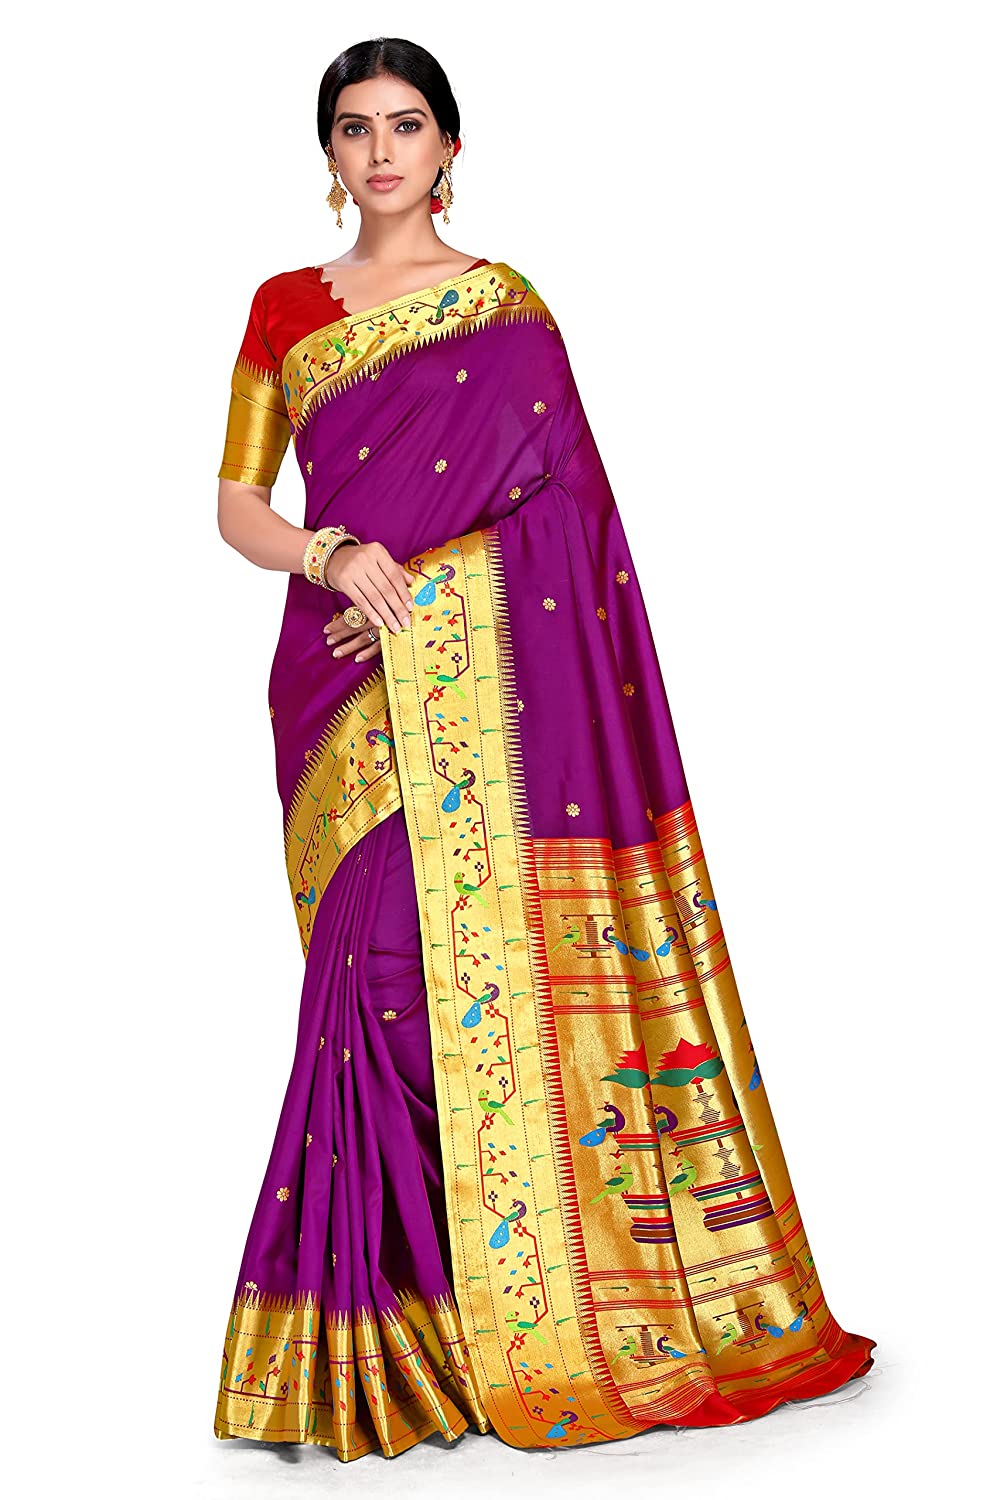 Any good names to name a saree product as a new brand? - Quora